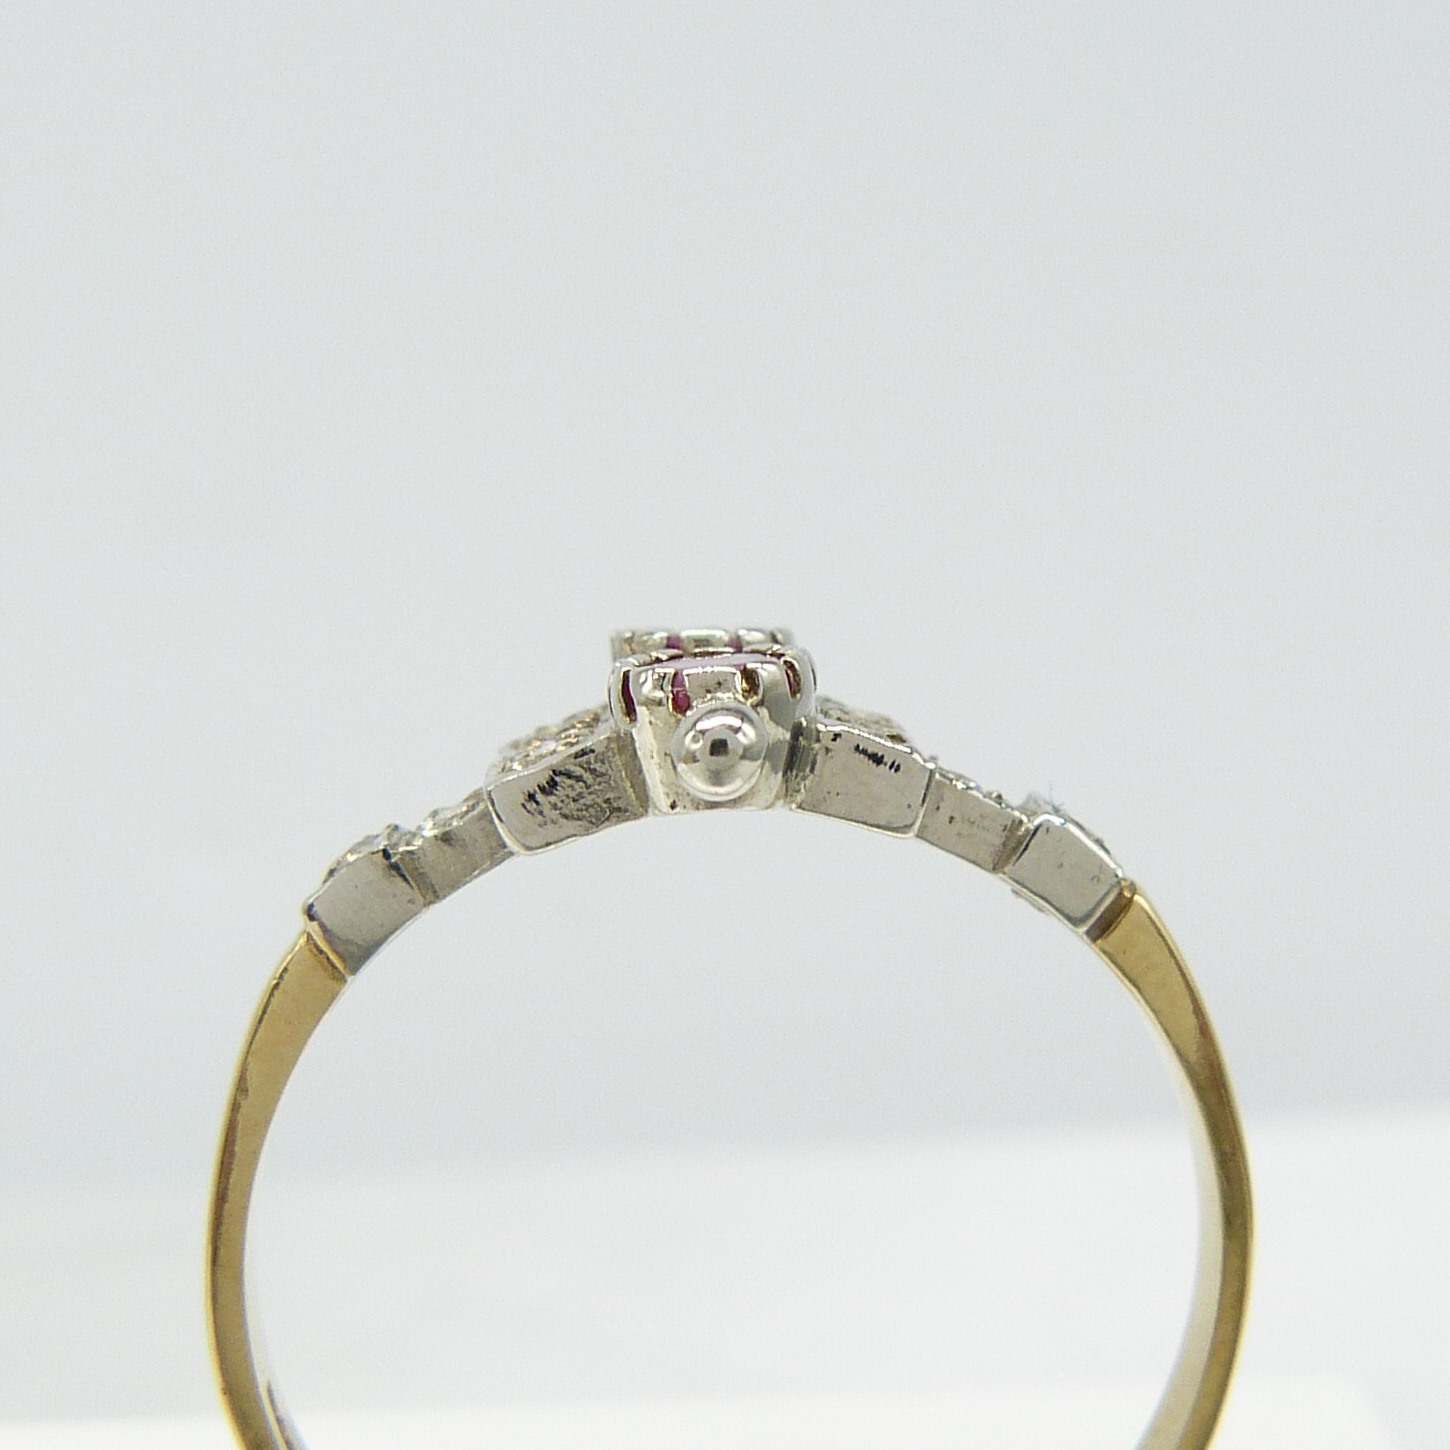 Vintage deco-inspired yellow and white gold ring set with rubies and diamonds - Image 6 of 8